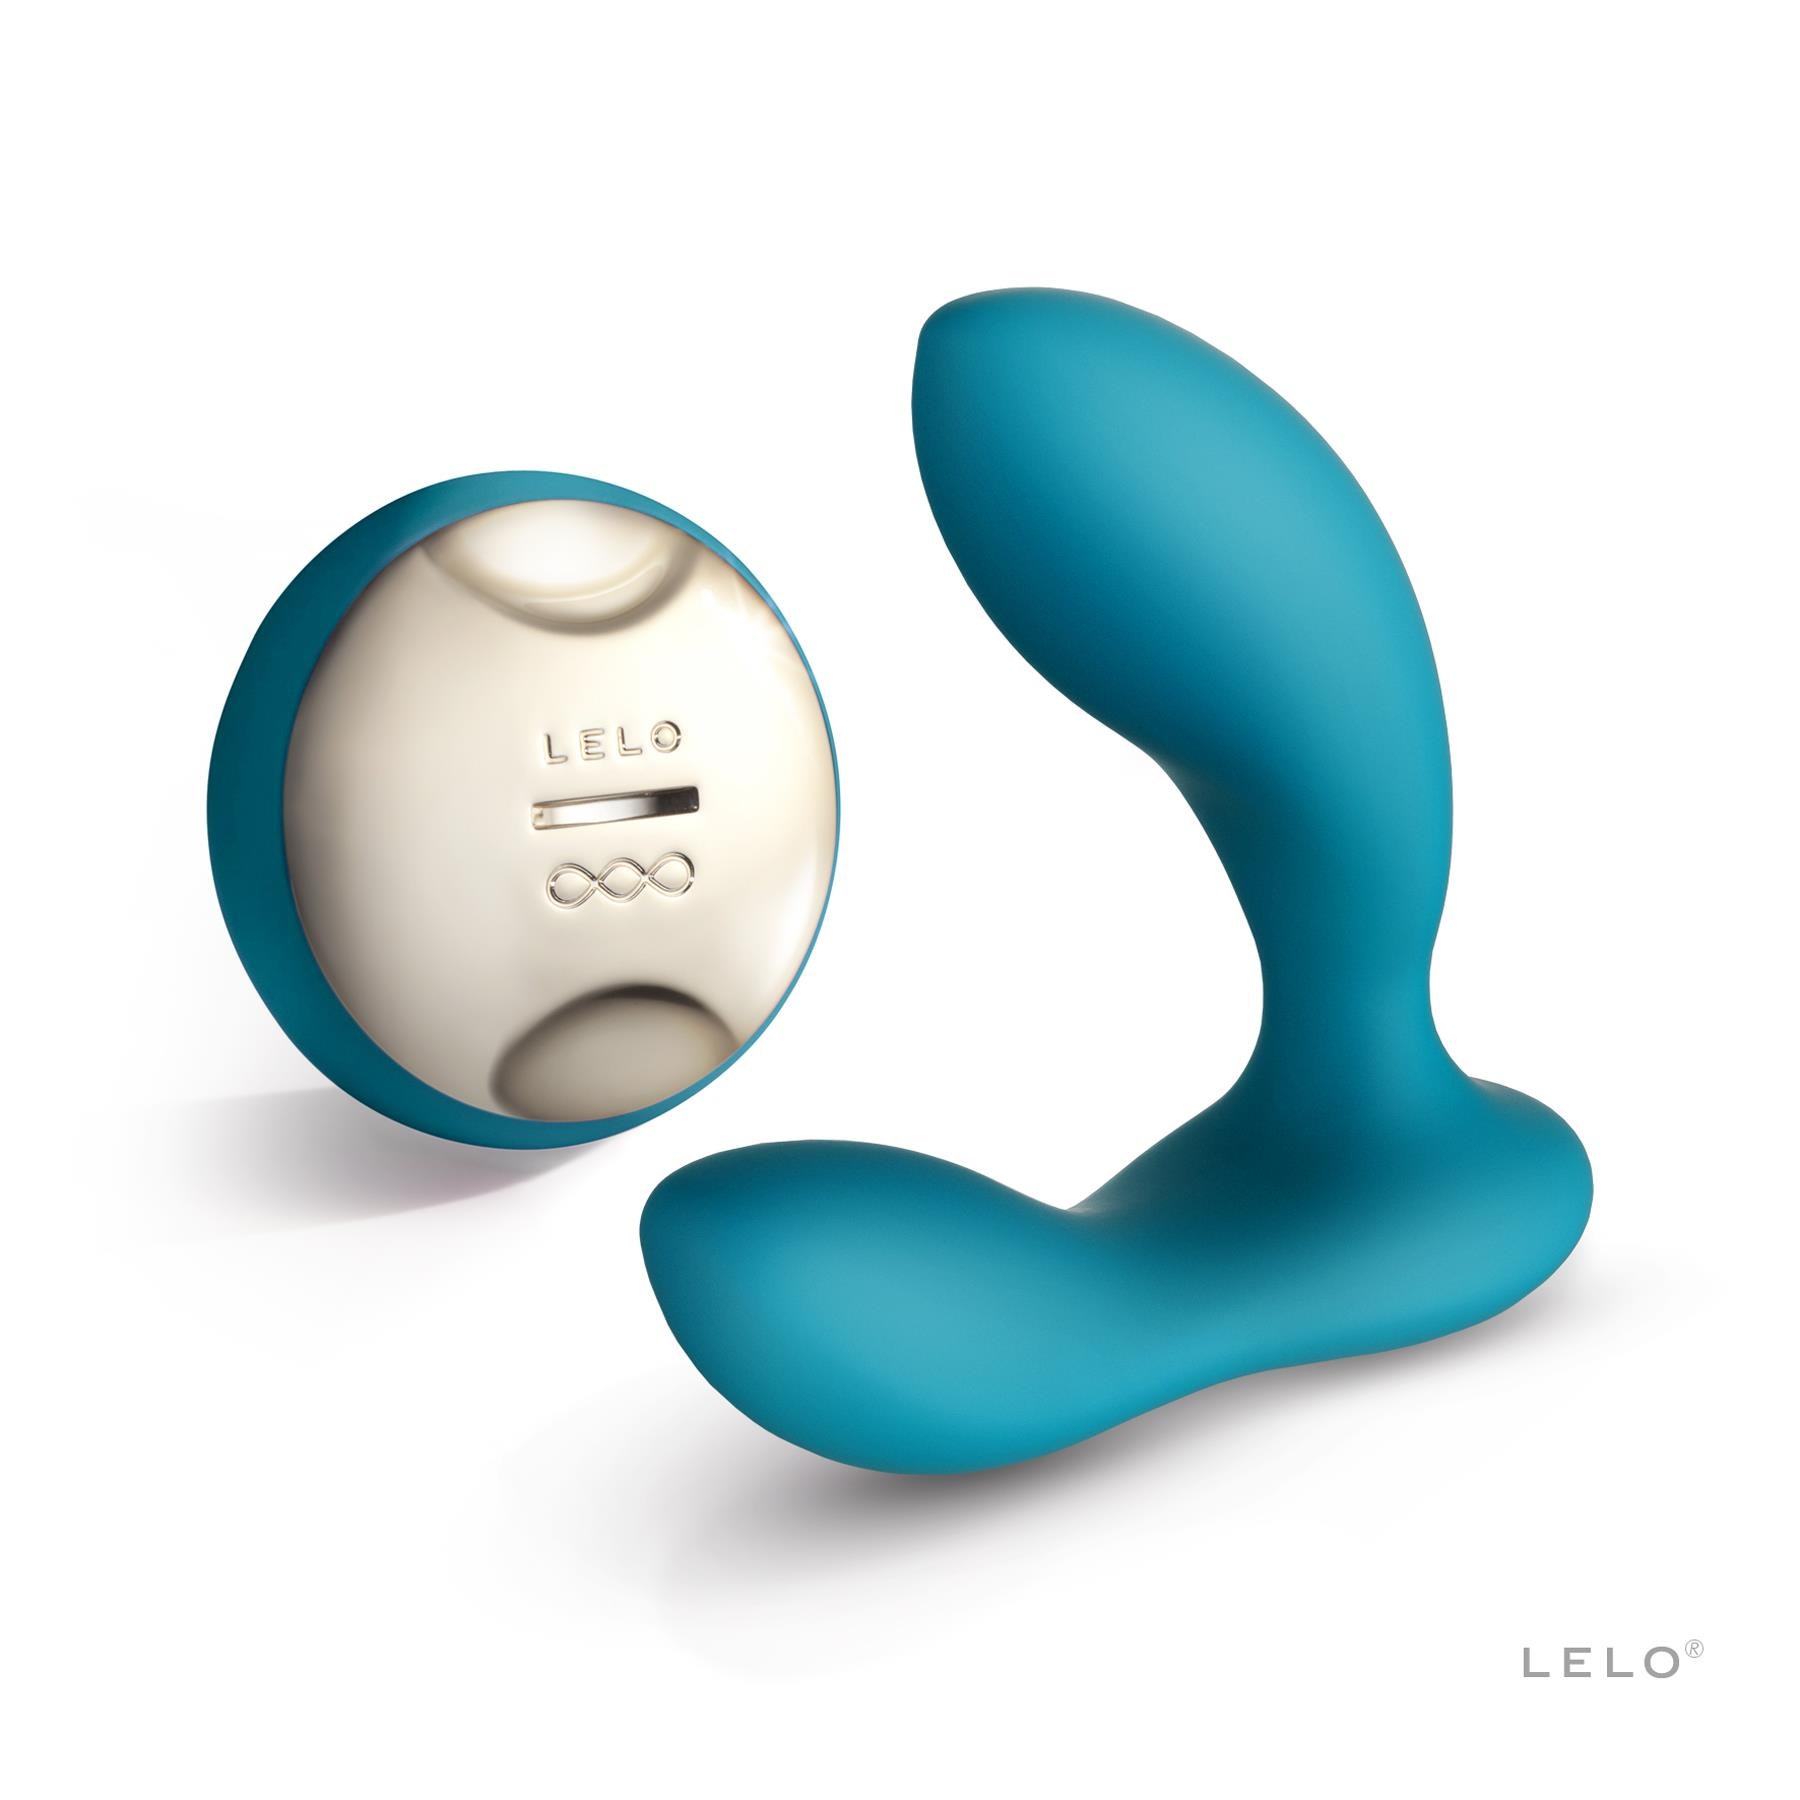 Lelo Hugo Prostate Massager - Product and Remote Control